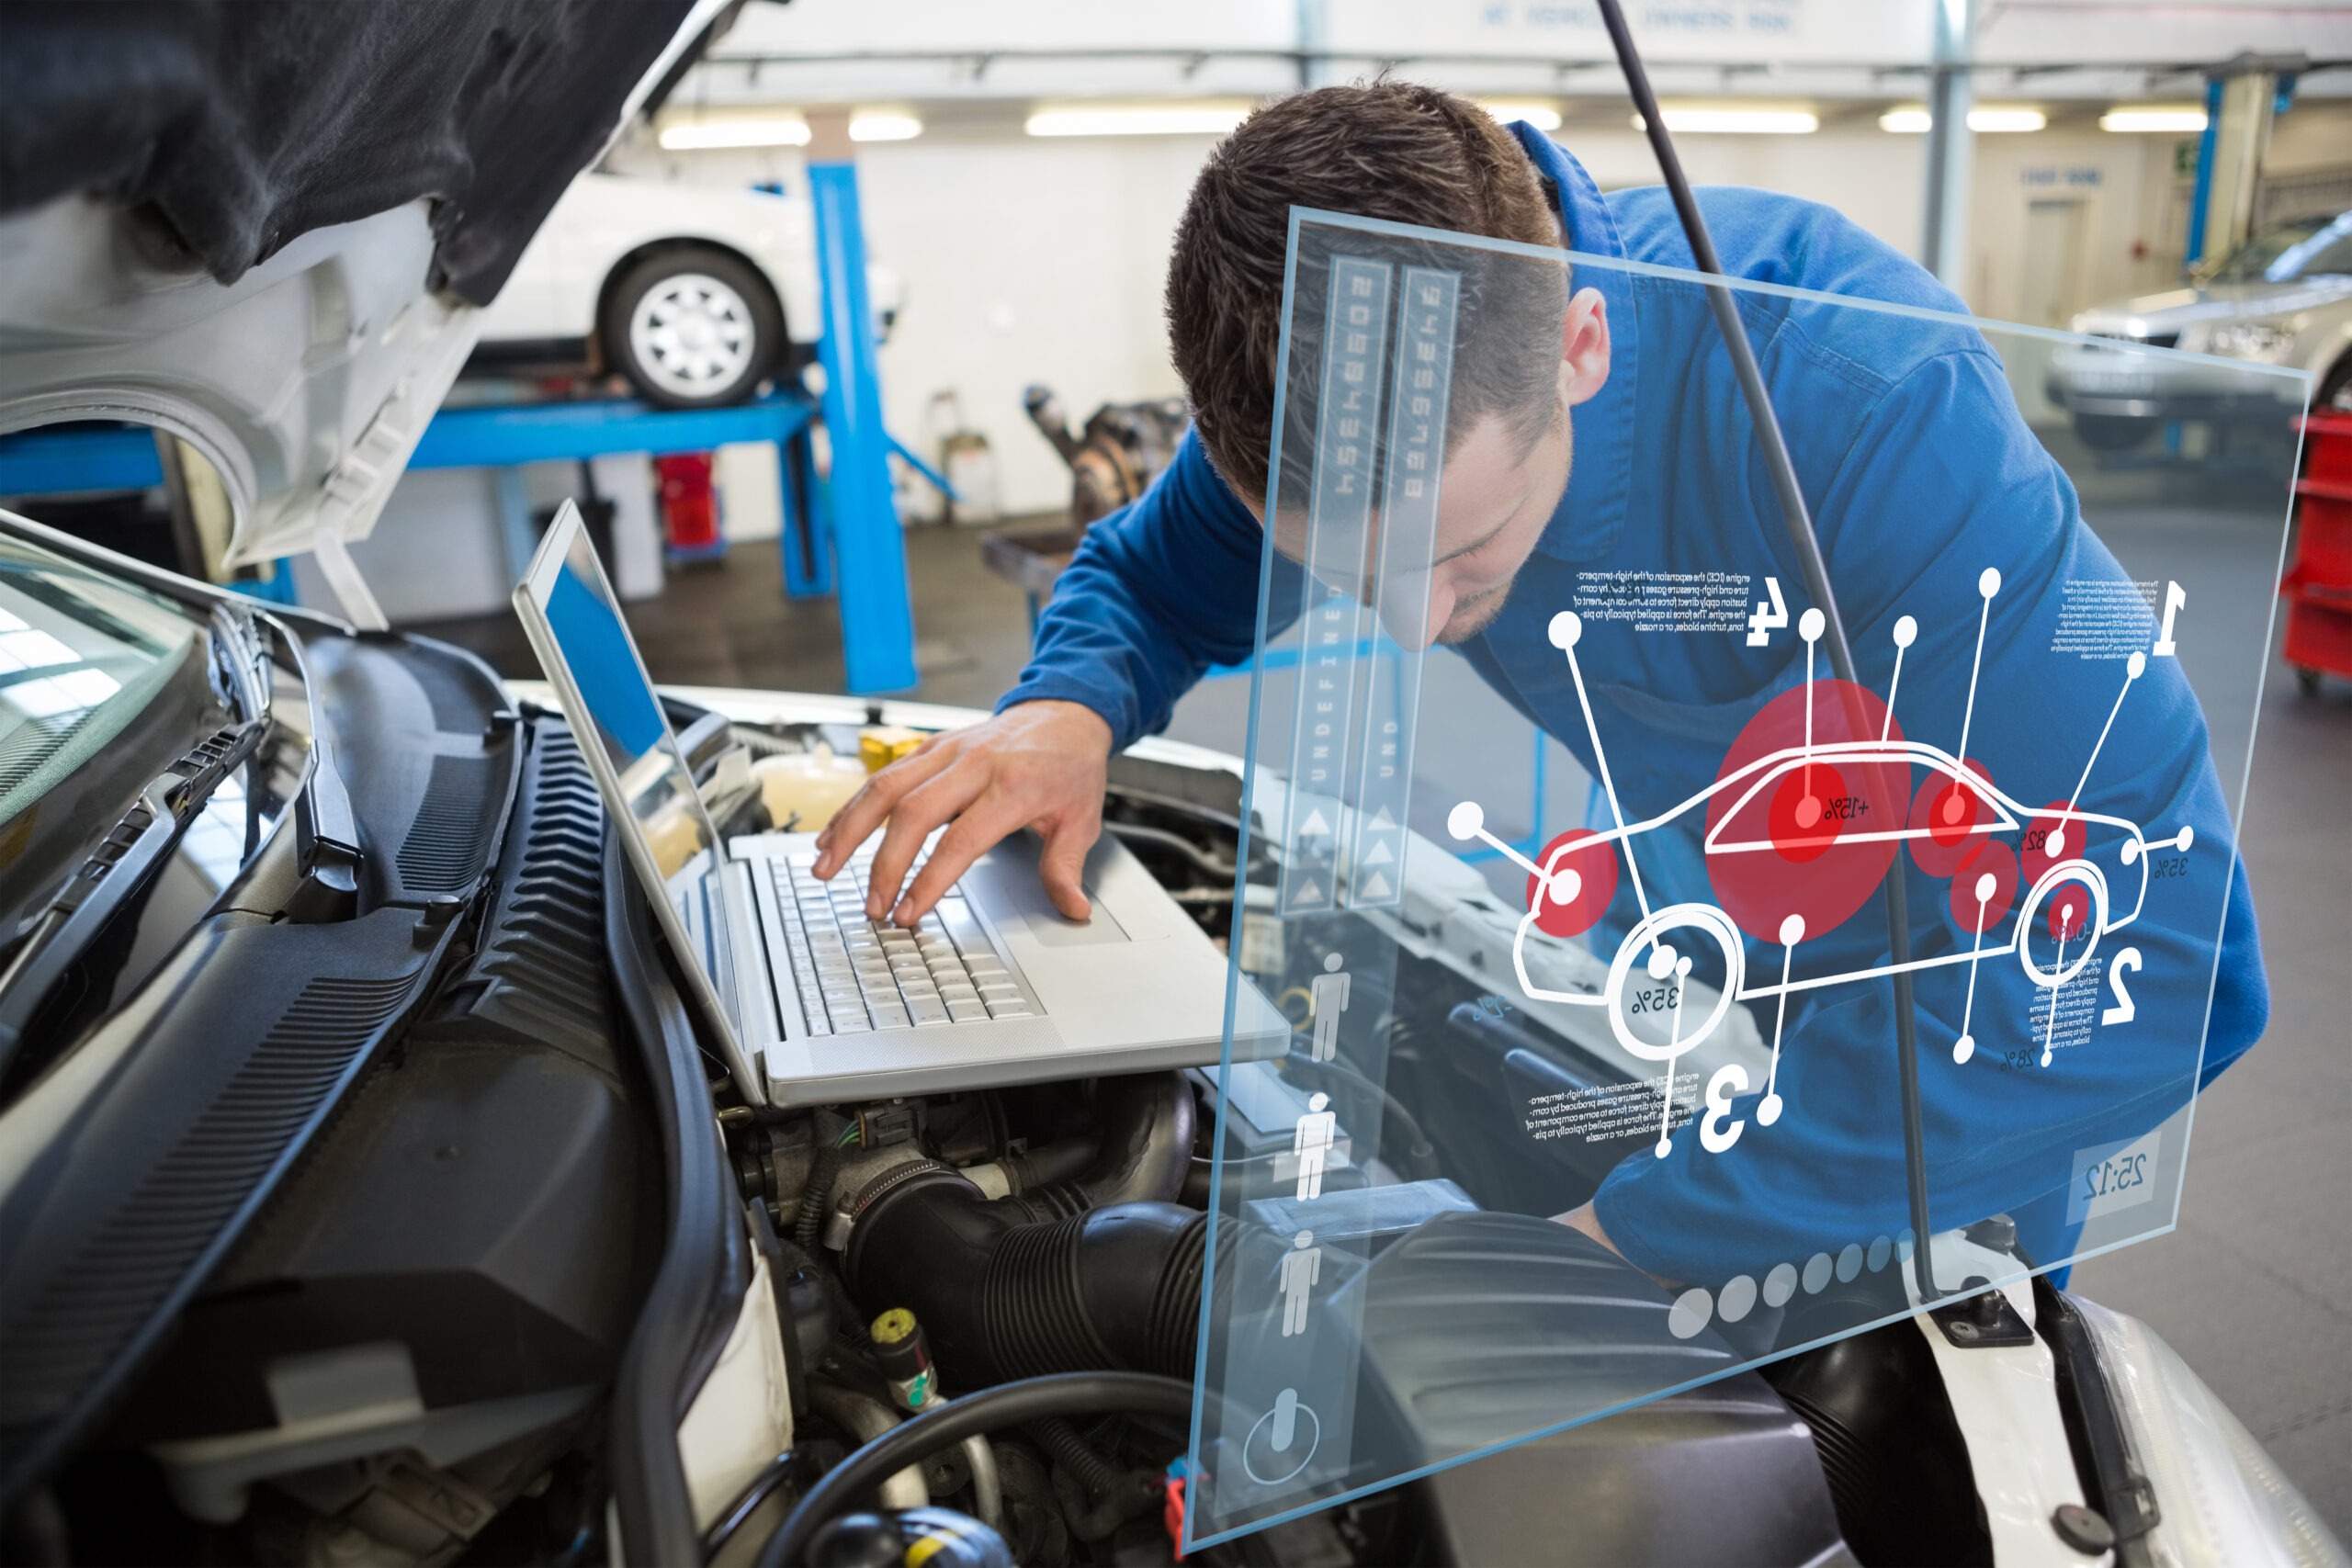 A mechanic in a workshop is analyzing a car engine with the help of advanced digital diagnostic interfaces that display various vehicle metrics and data points, symbolizing the integration of technology in vehicle maintenance.